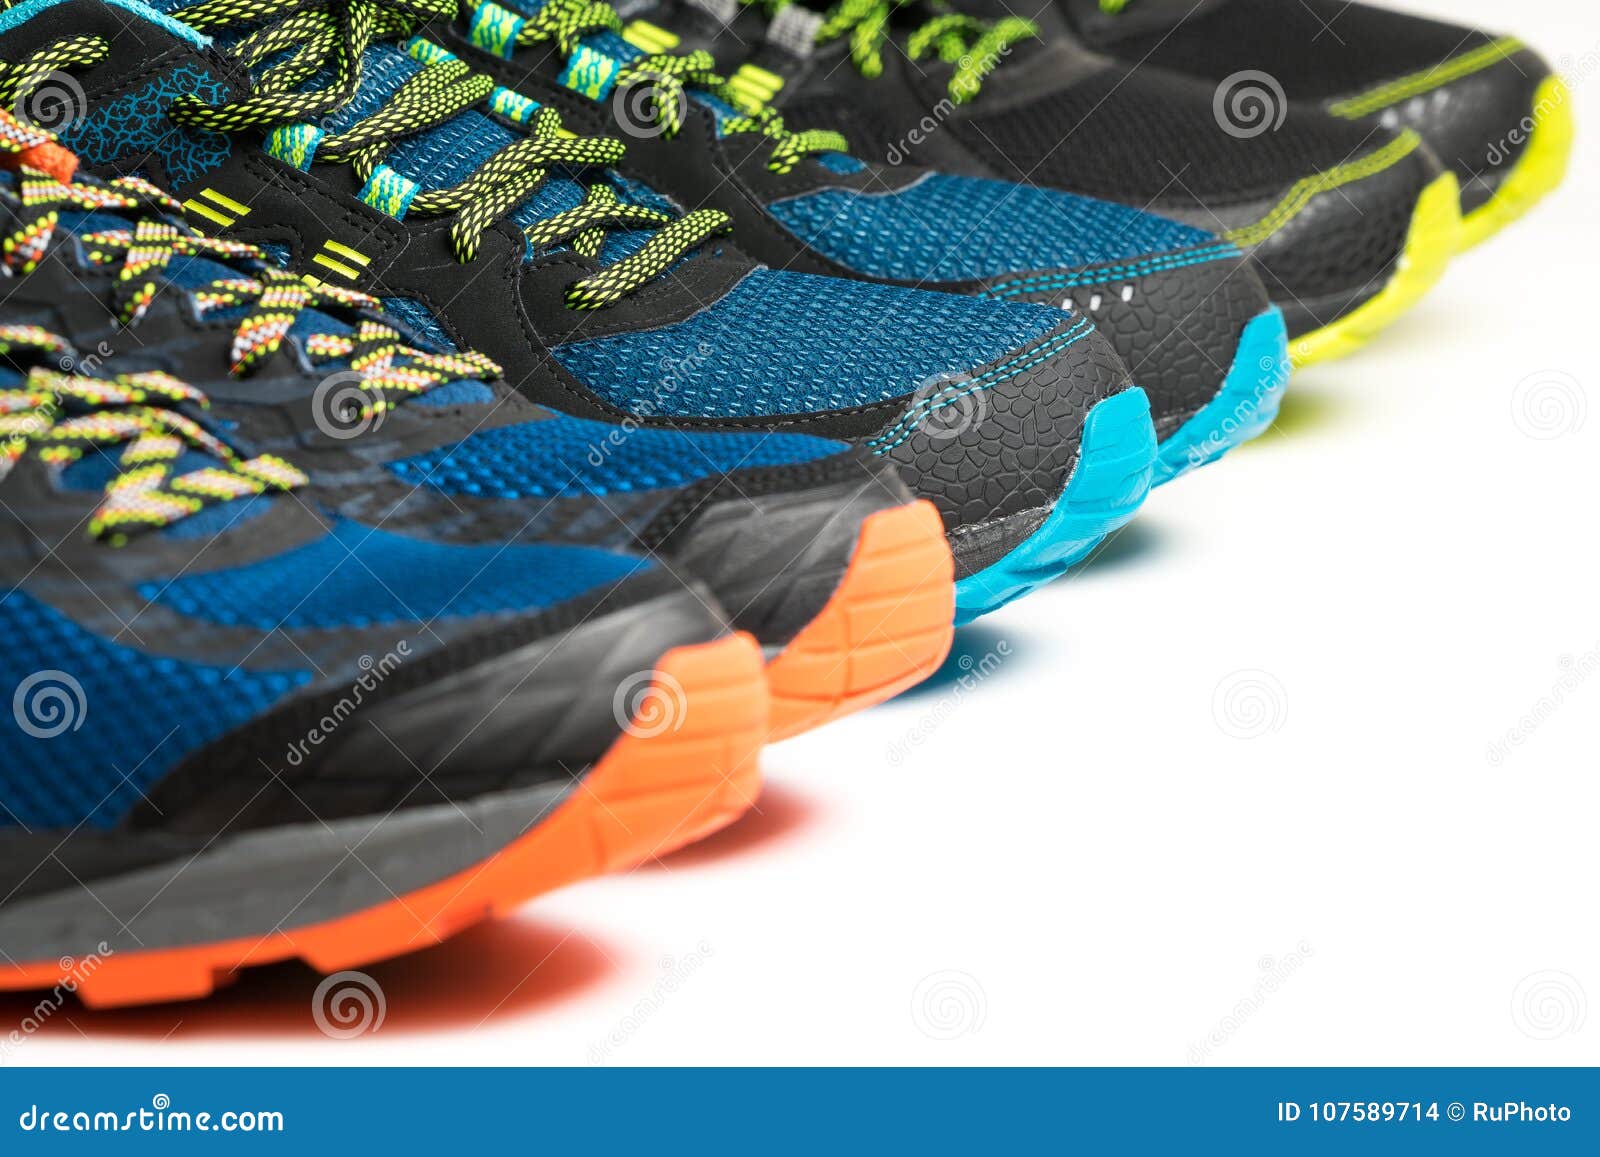 colourful running shoes